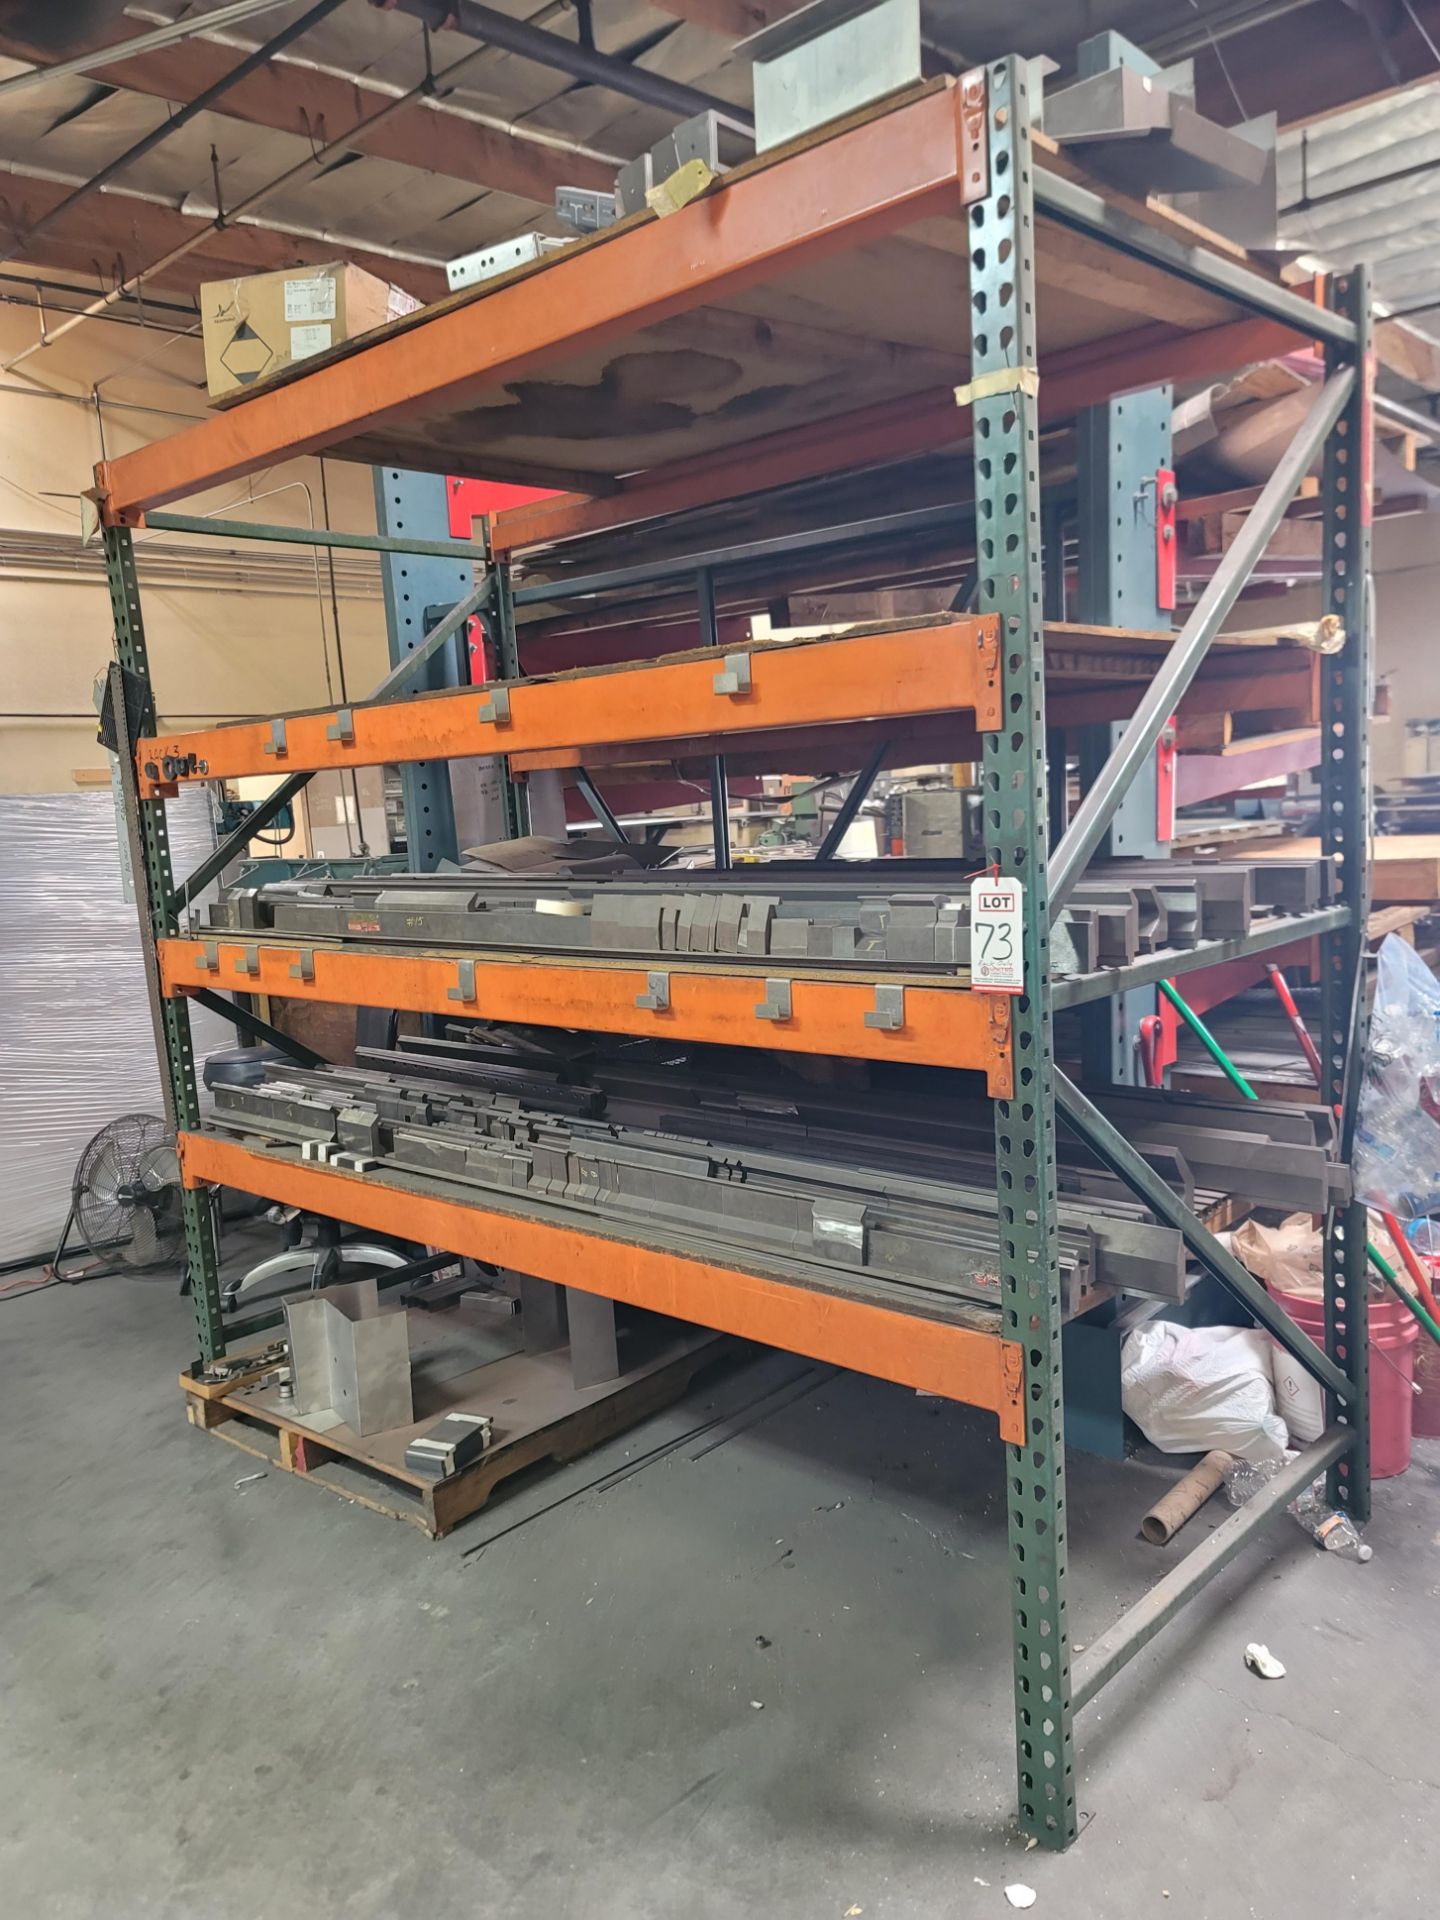 LOT - (1) SECTION OF PALLET RACKING, 8' X 4' X 8' HT, CONTENTS NOT INCLUDED